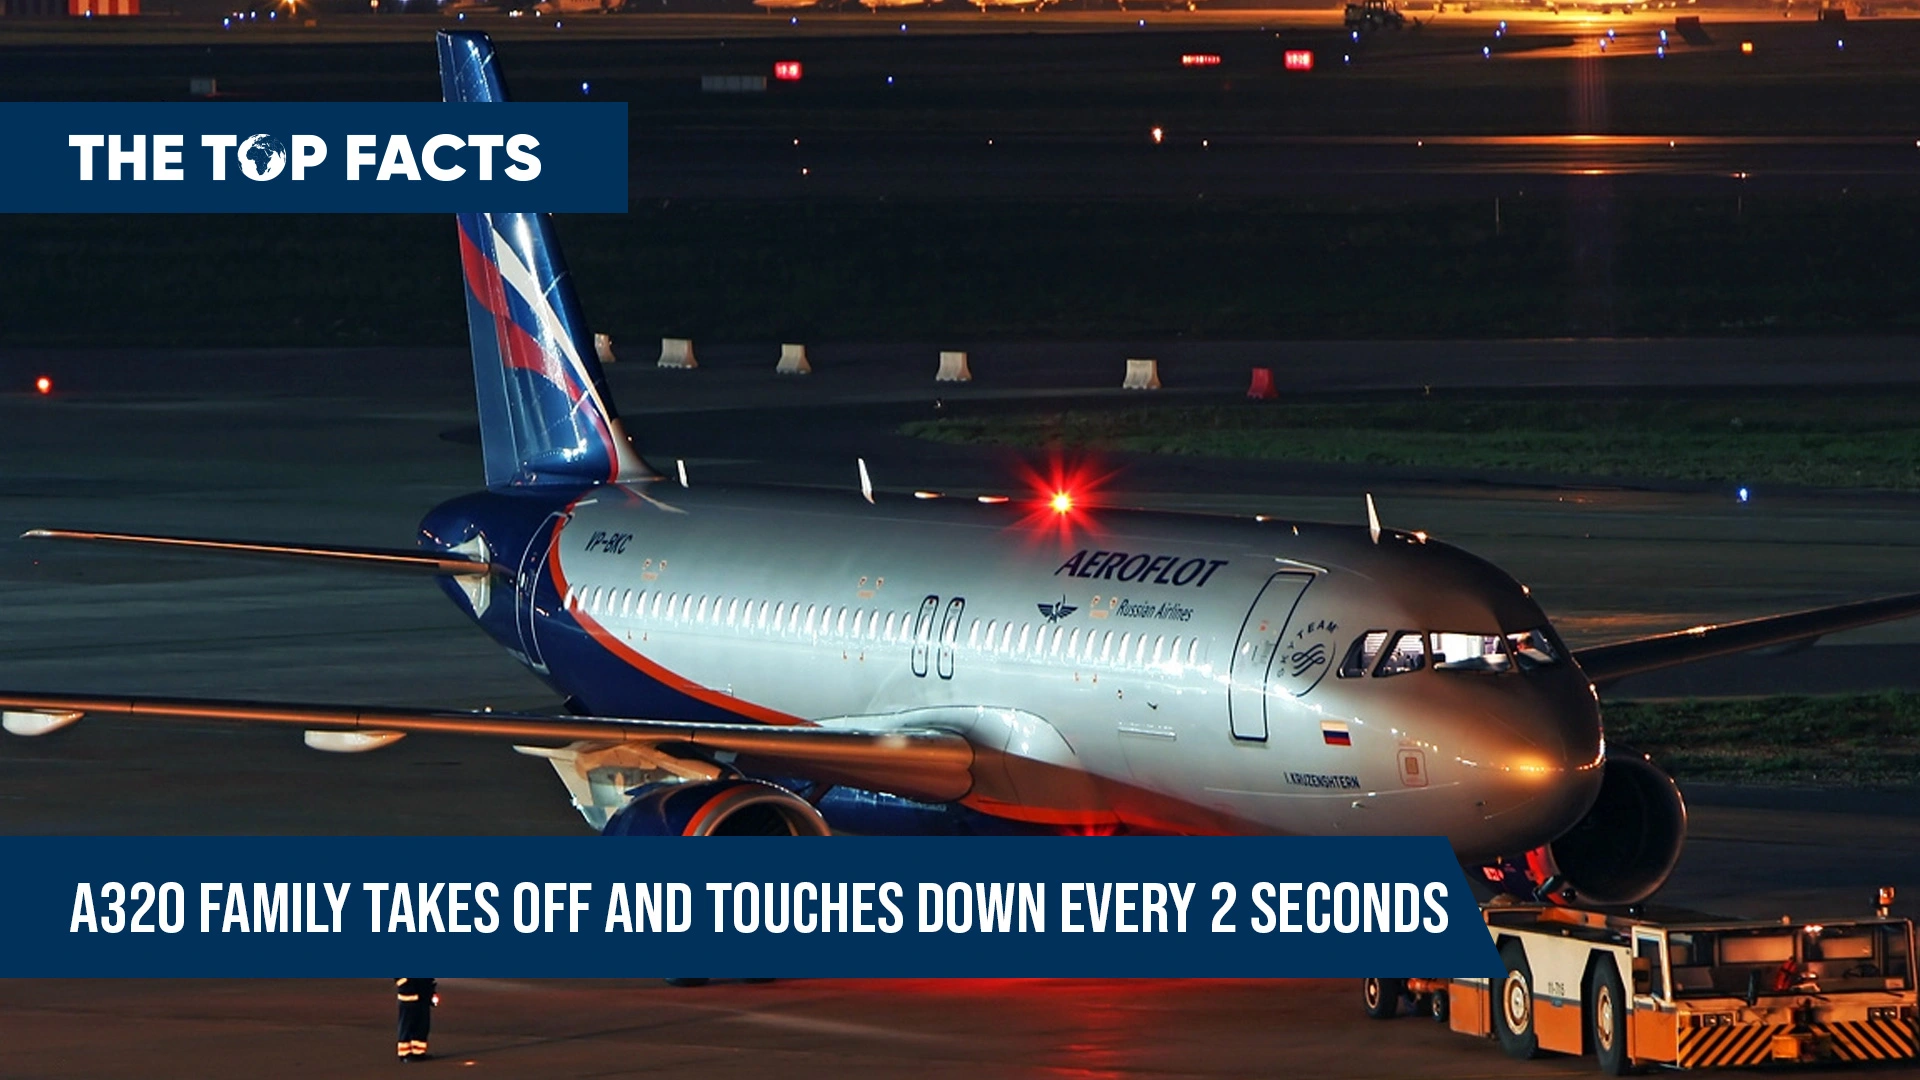 A member of the Airbus A320 family takes off or touches down every 2 seconds on average.